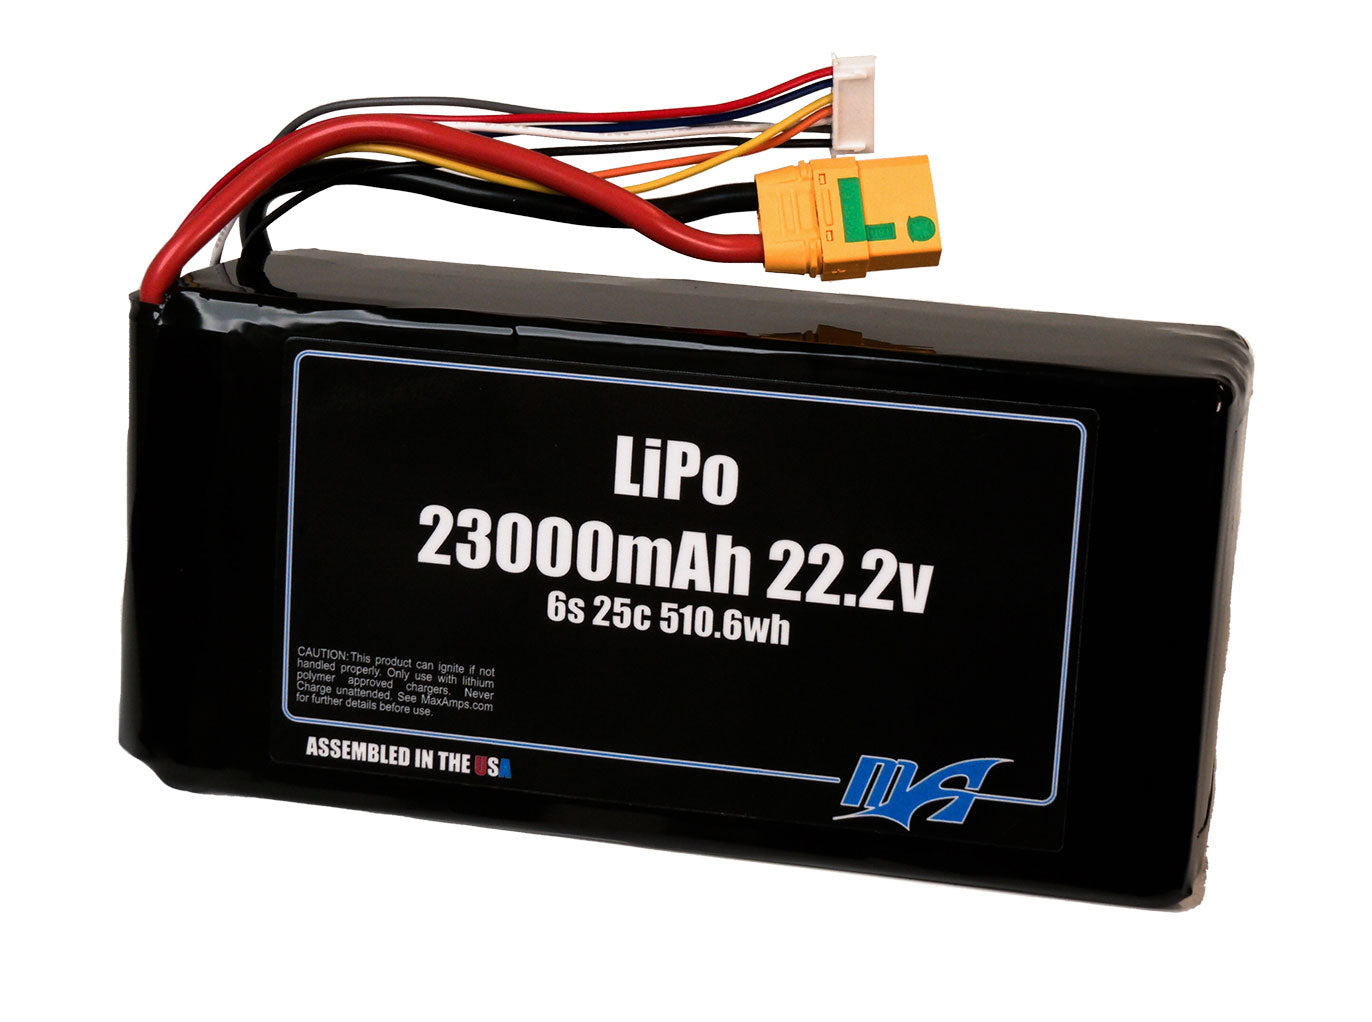 A MaxAmps LiPo 23000mAh 6S 22.2 volt battery pack with XT90 Anti Spark Connector